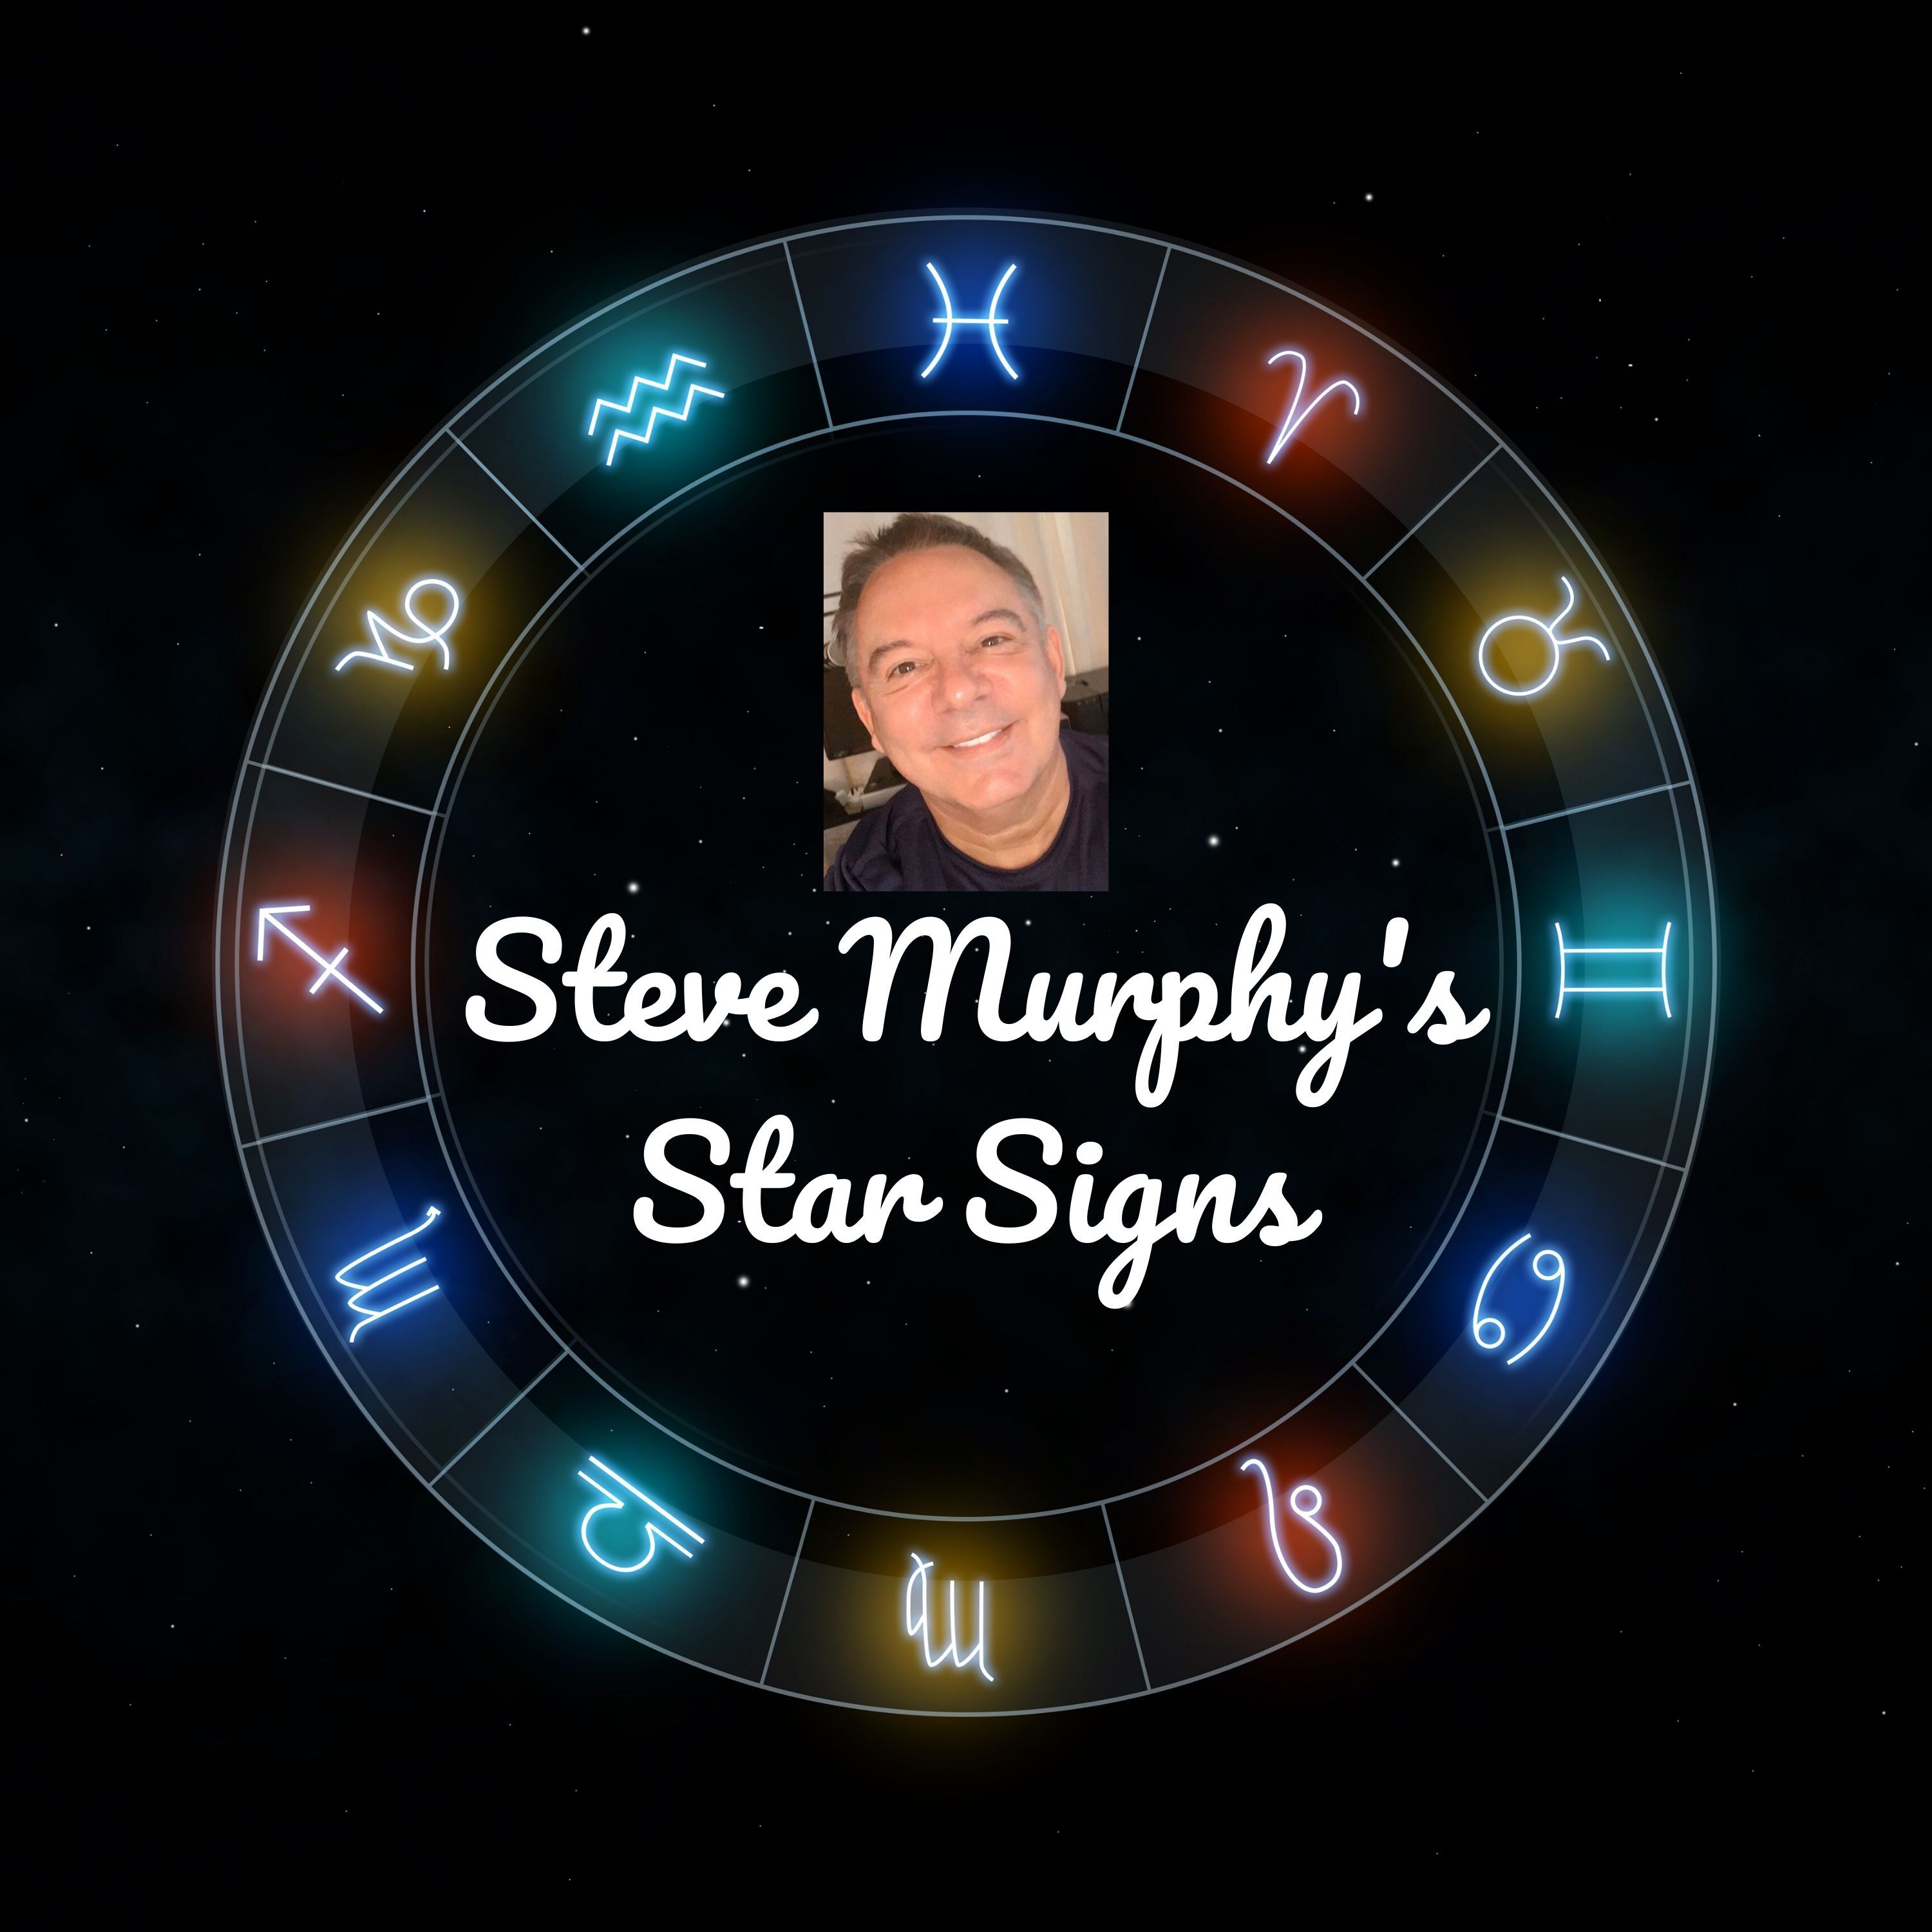 Your Star Signs for wc 13 July 2020 | Astrology & Numerology Report